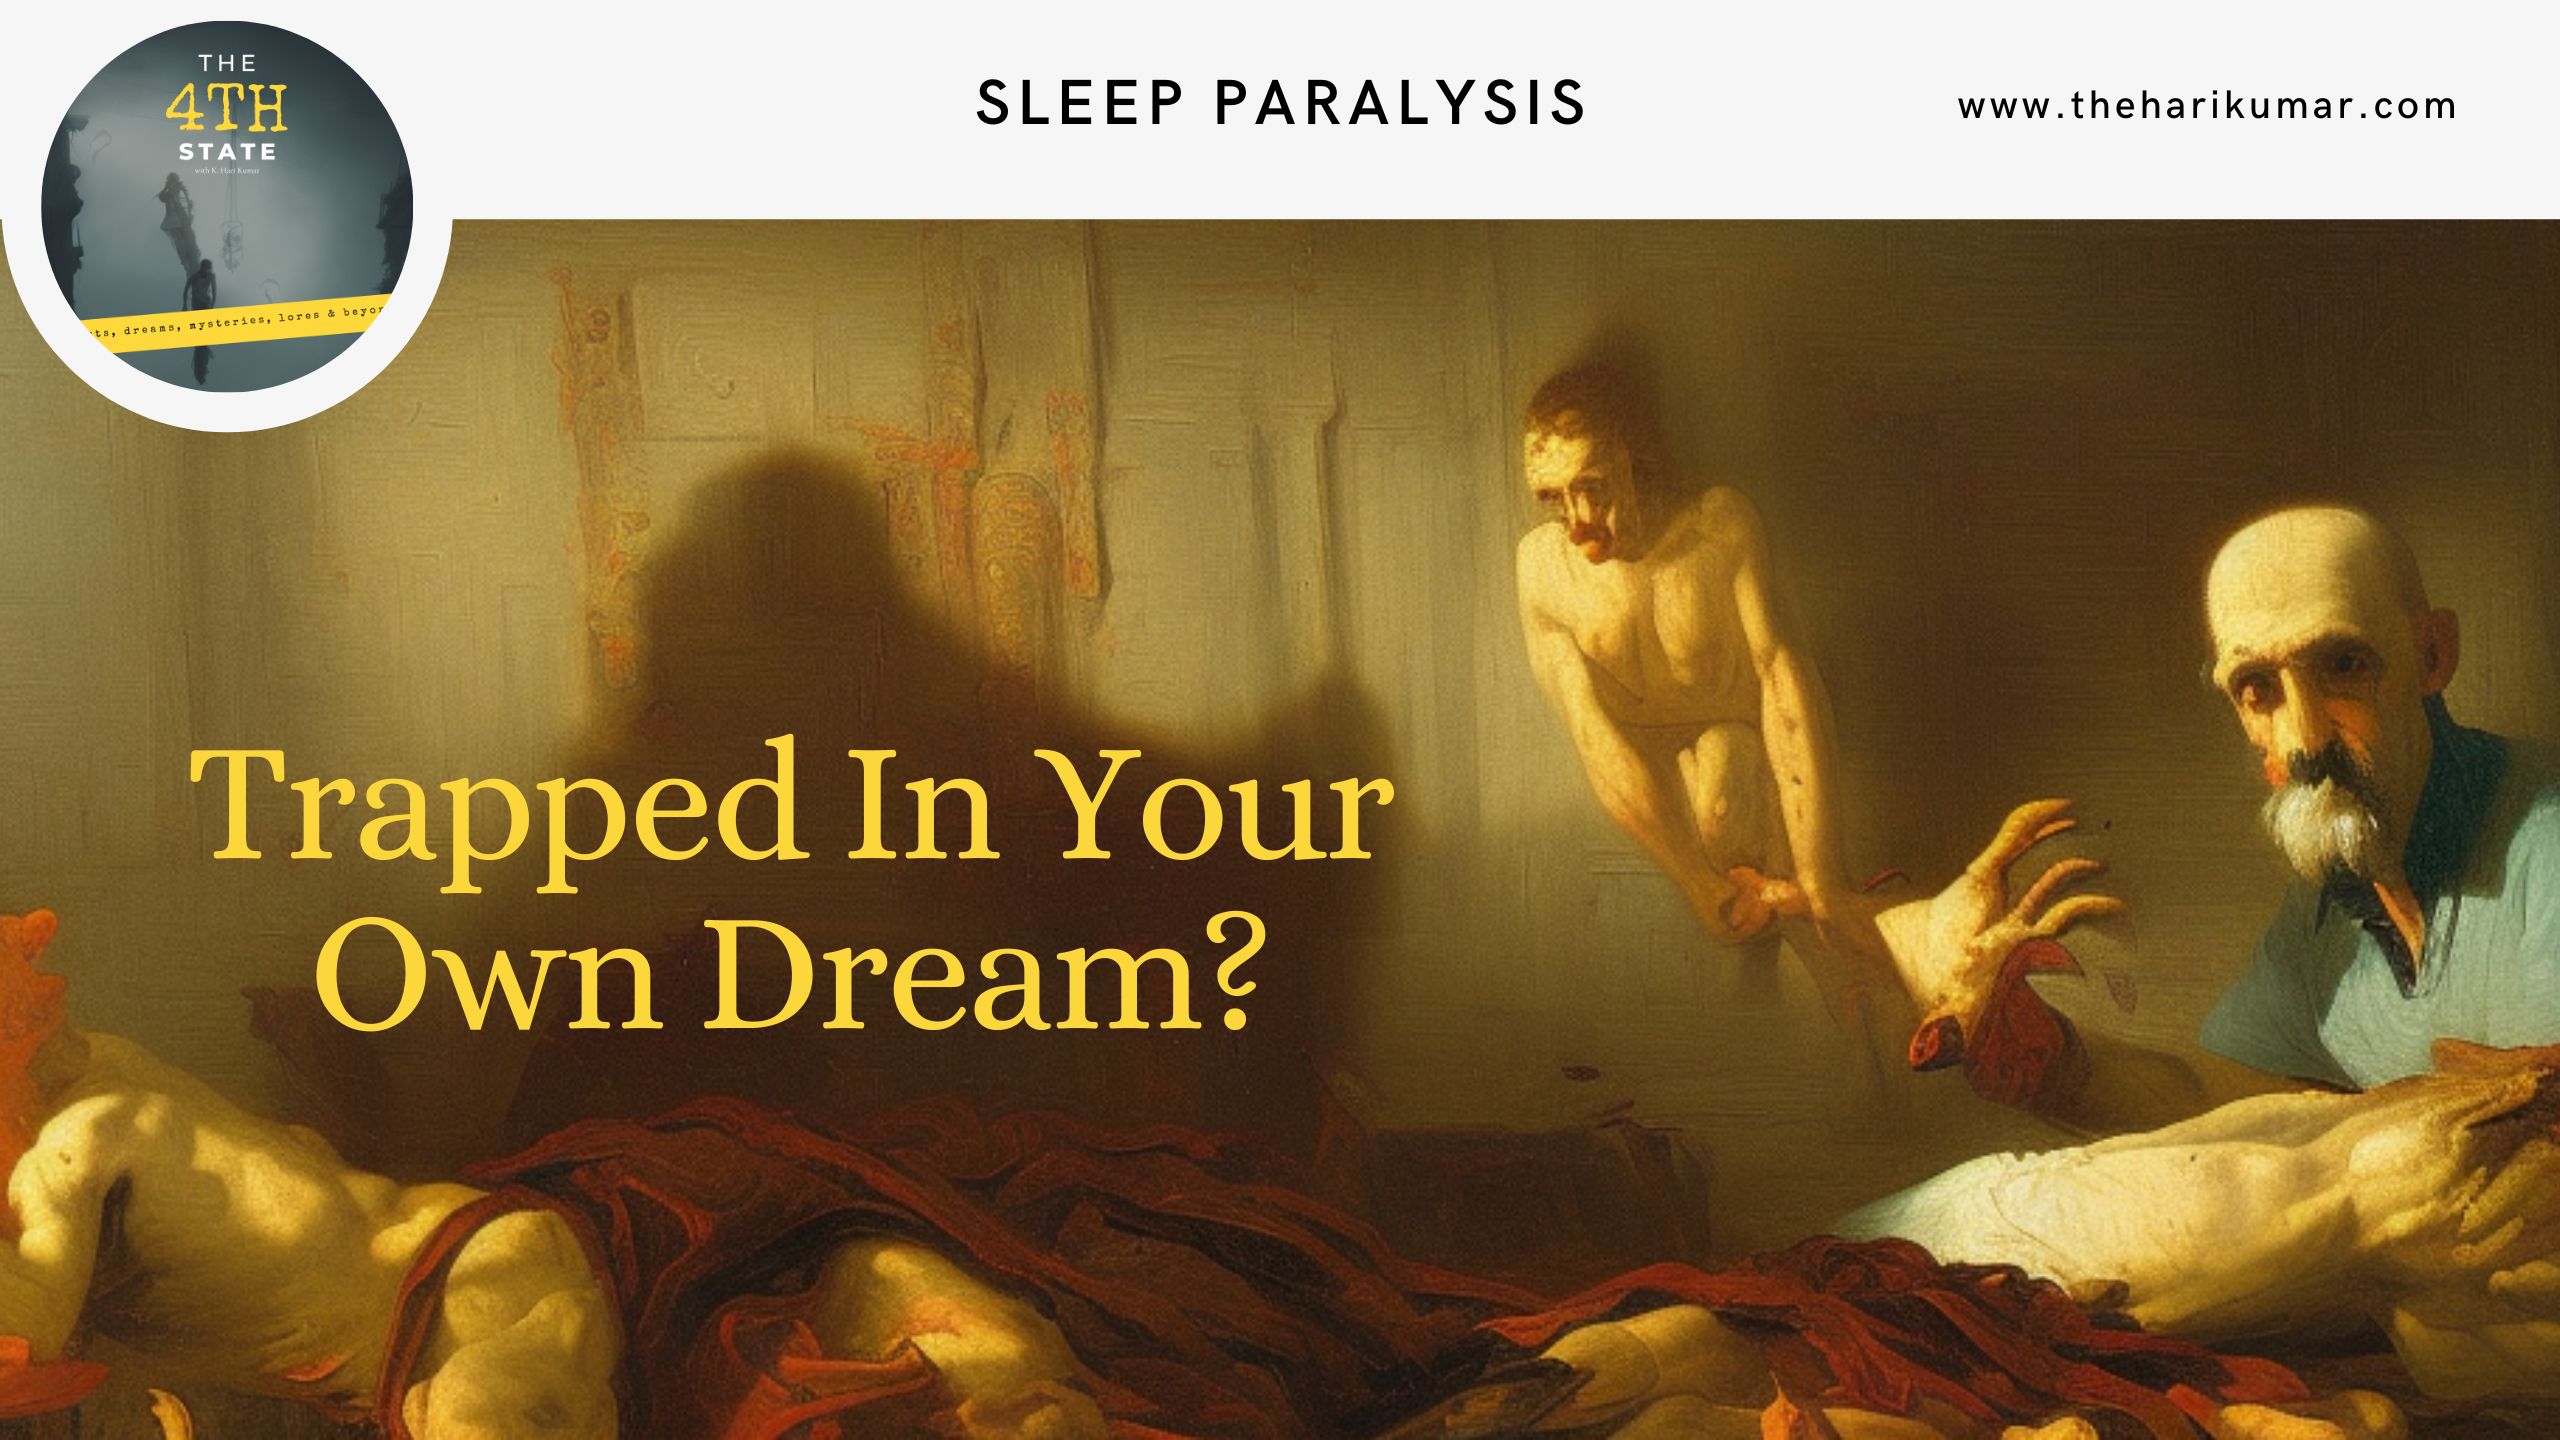 Trapped in Your Own Dream – Sleep Paralysis